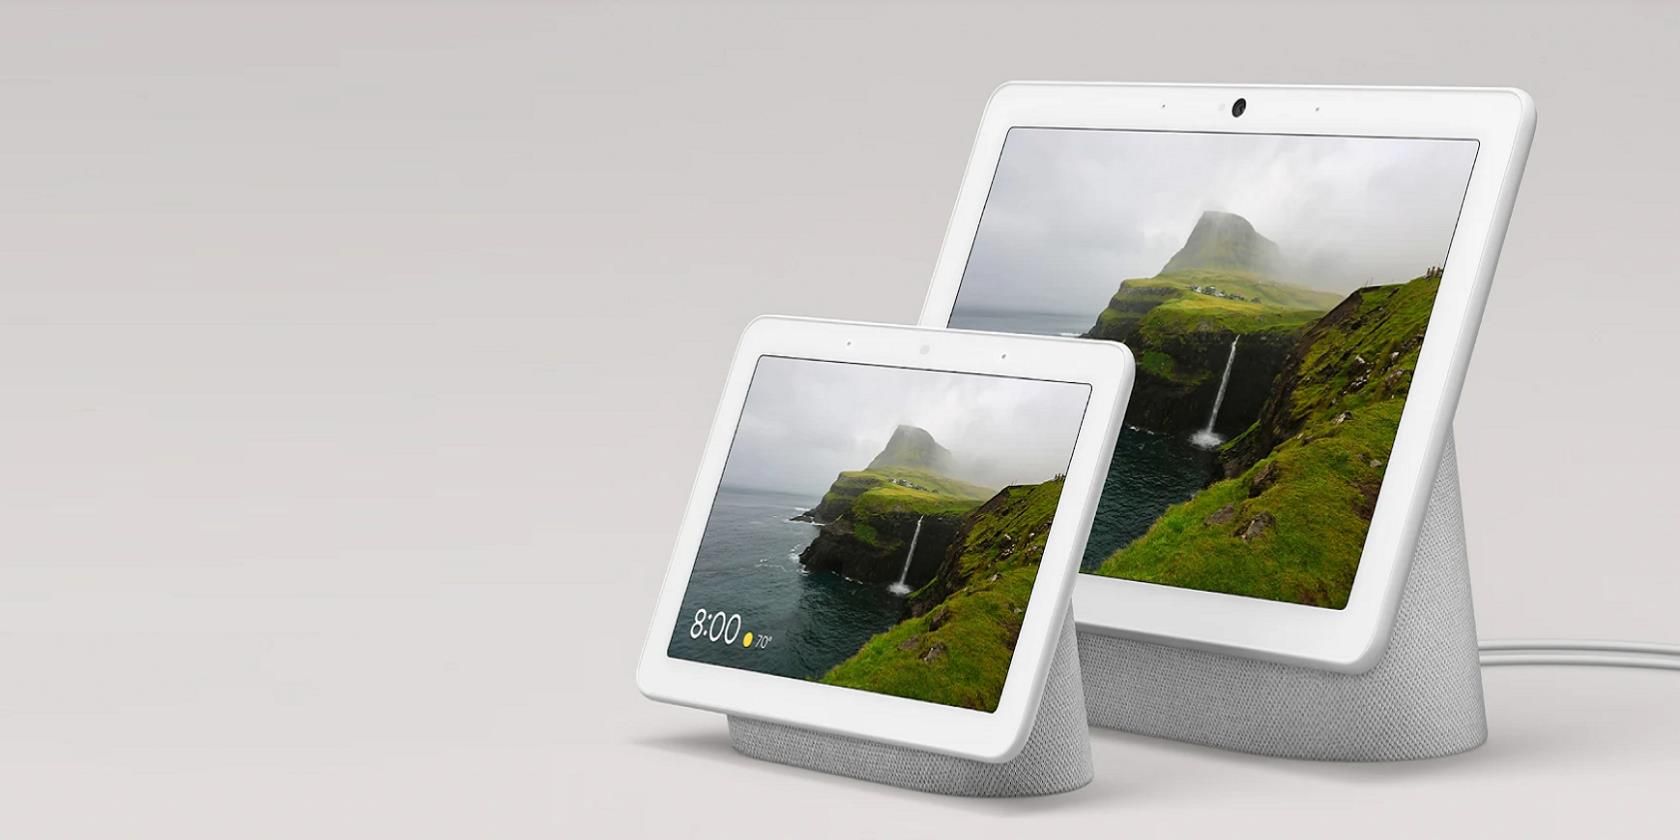 Google Nest Hub vs. Nest Hub Max: What Are the Differences?